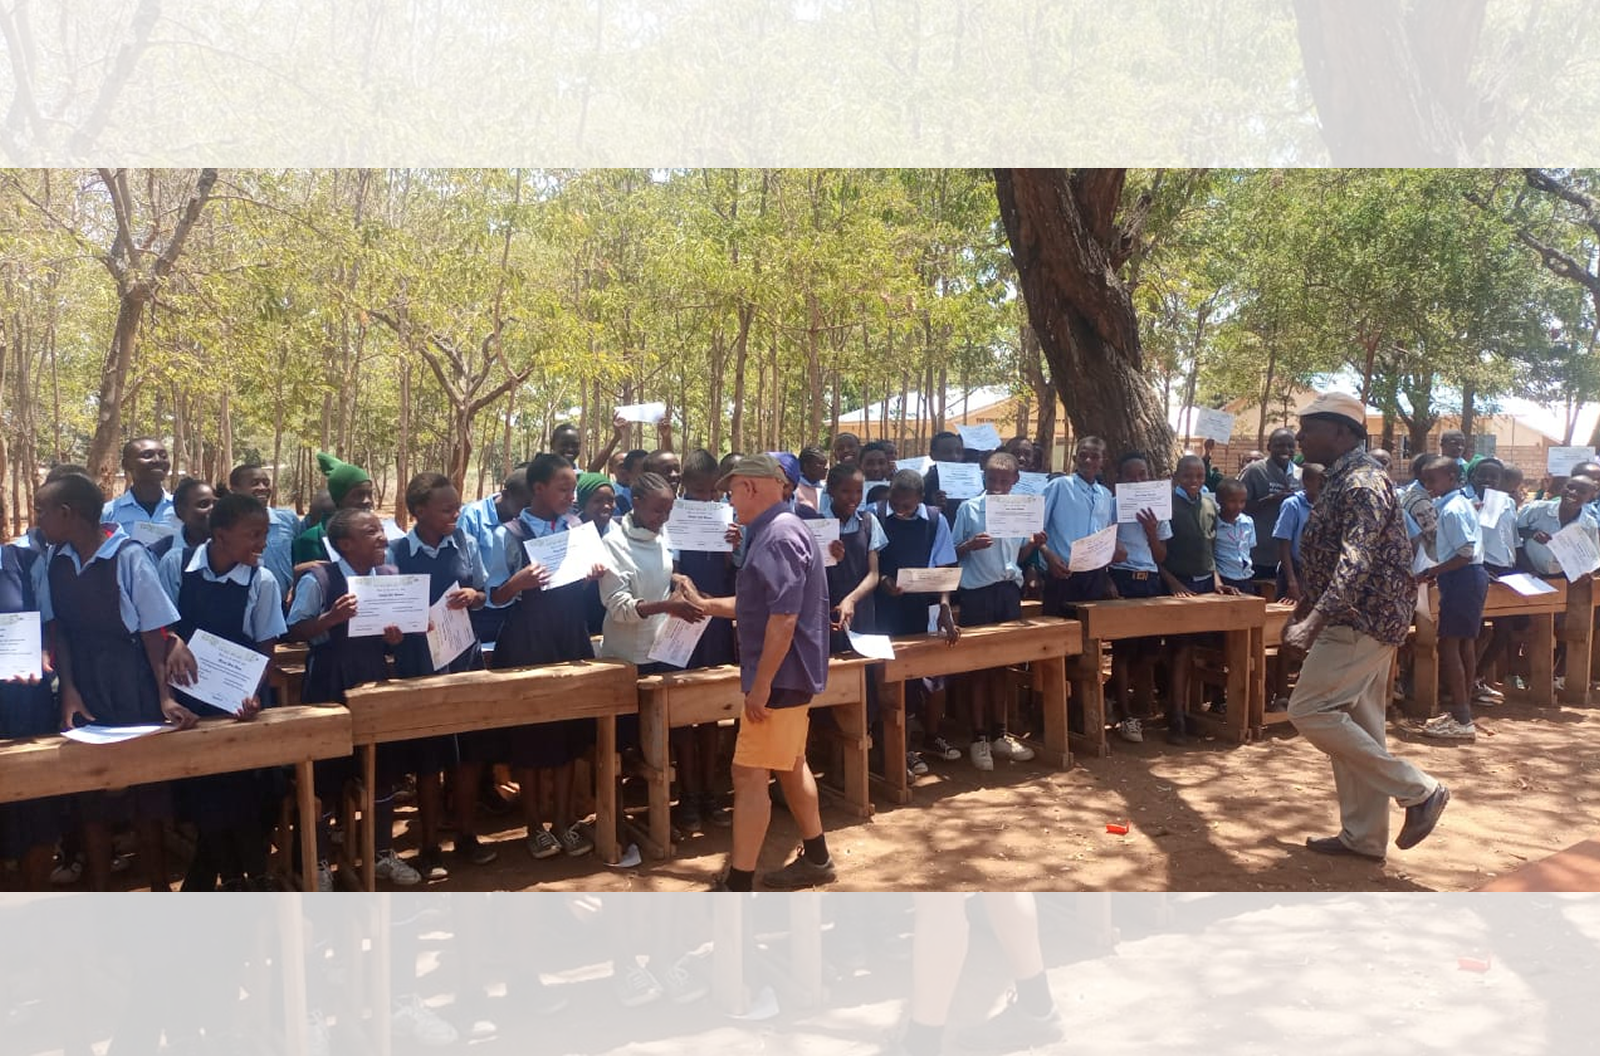 7th ICT graduation for candidates at S.A Gategi primary school